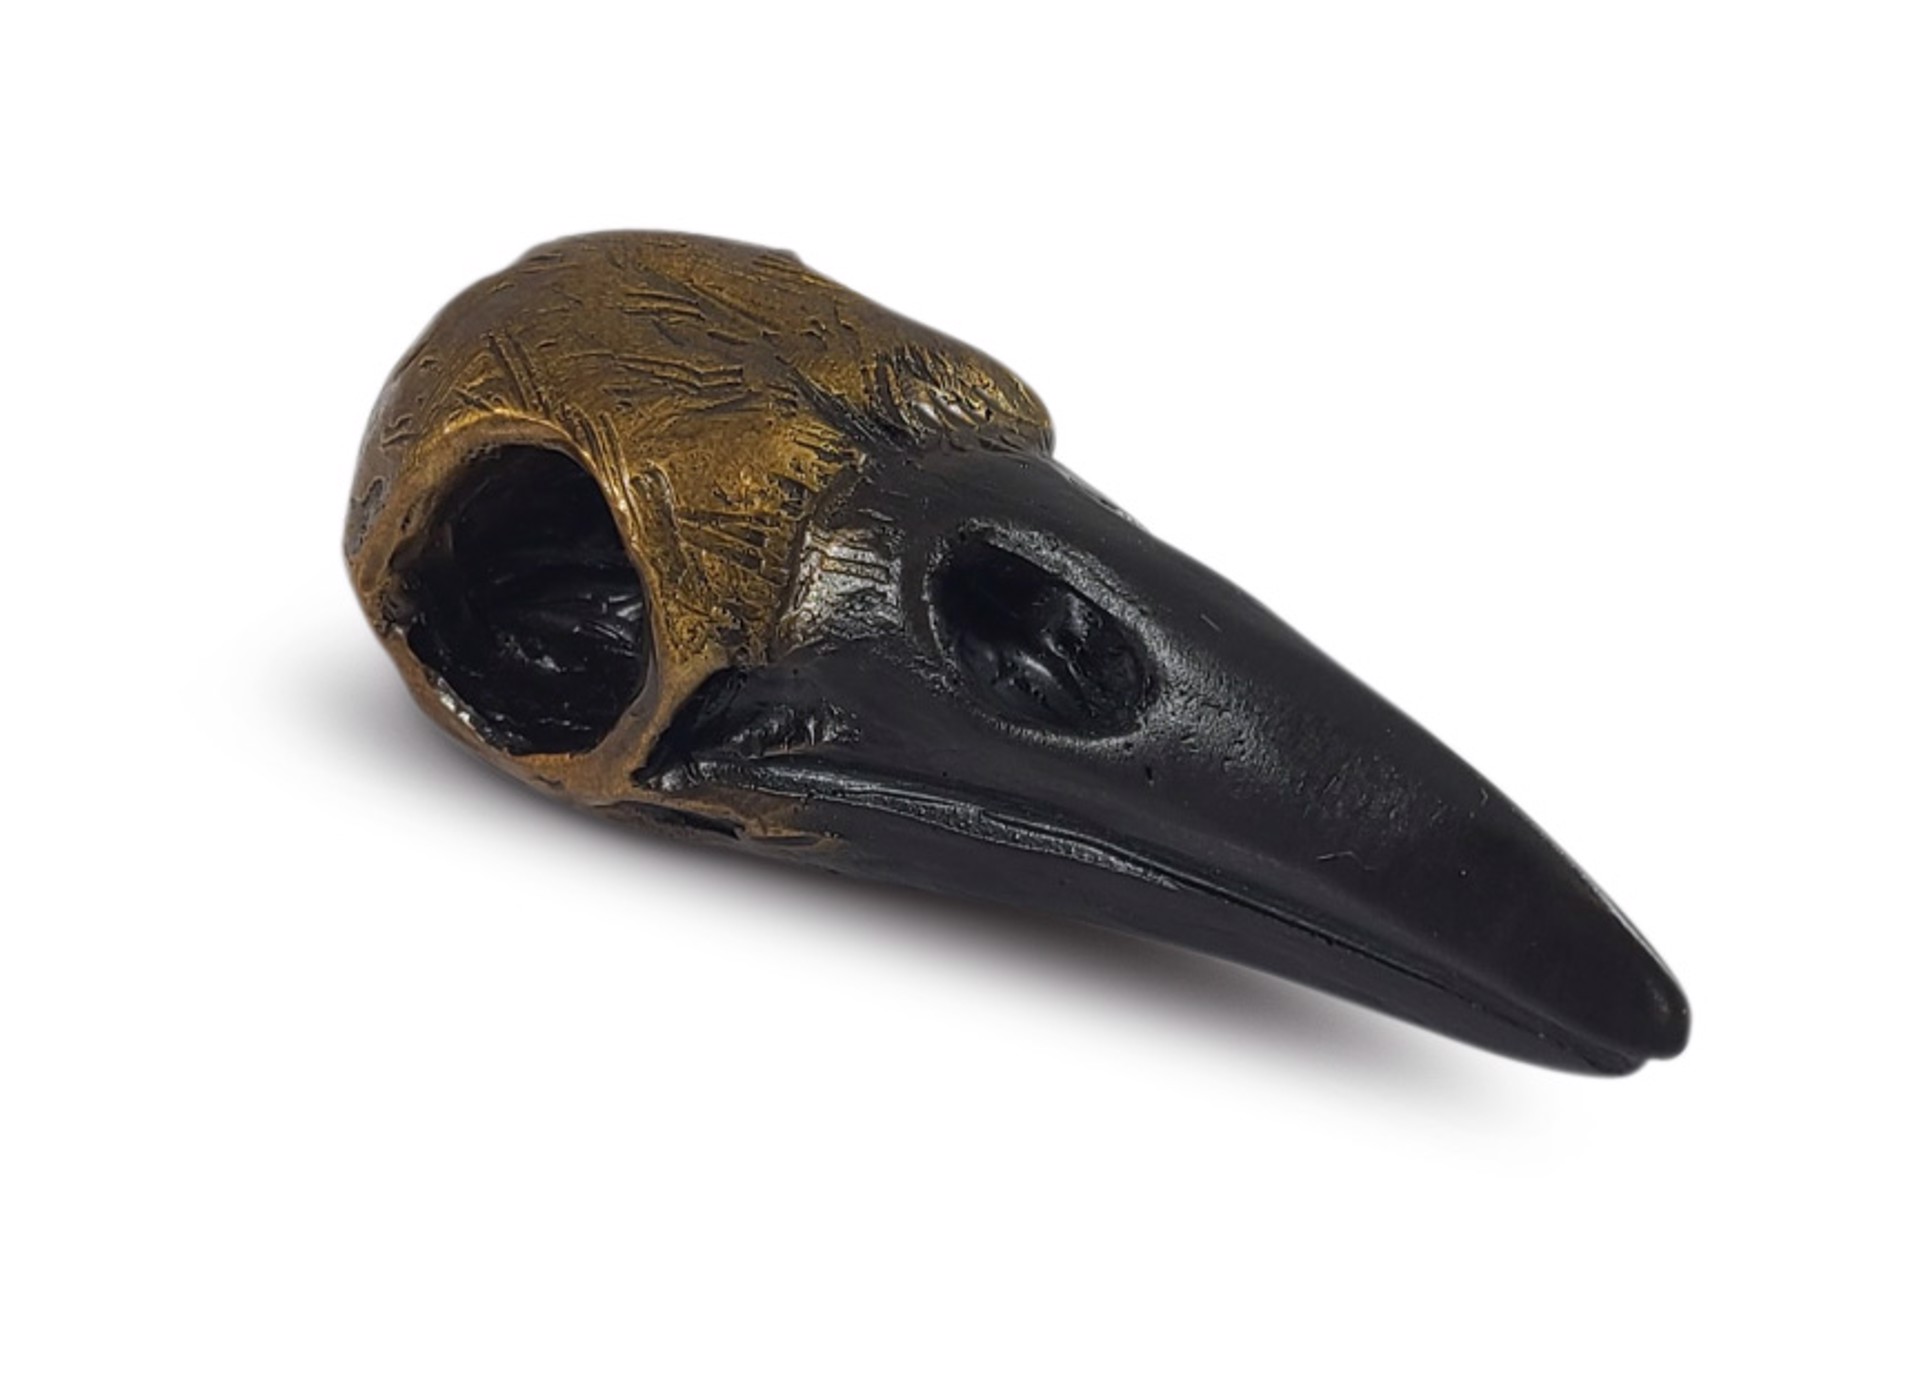 Raven Skull by Diana Simpson